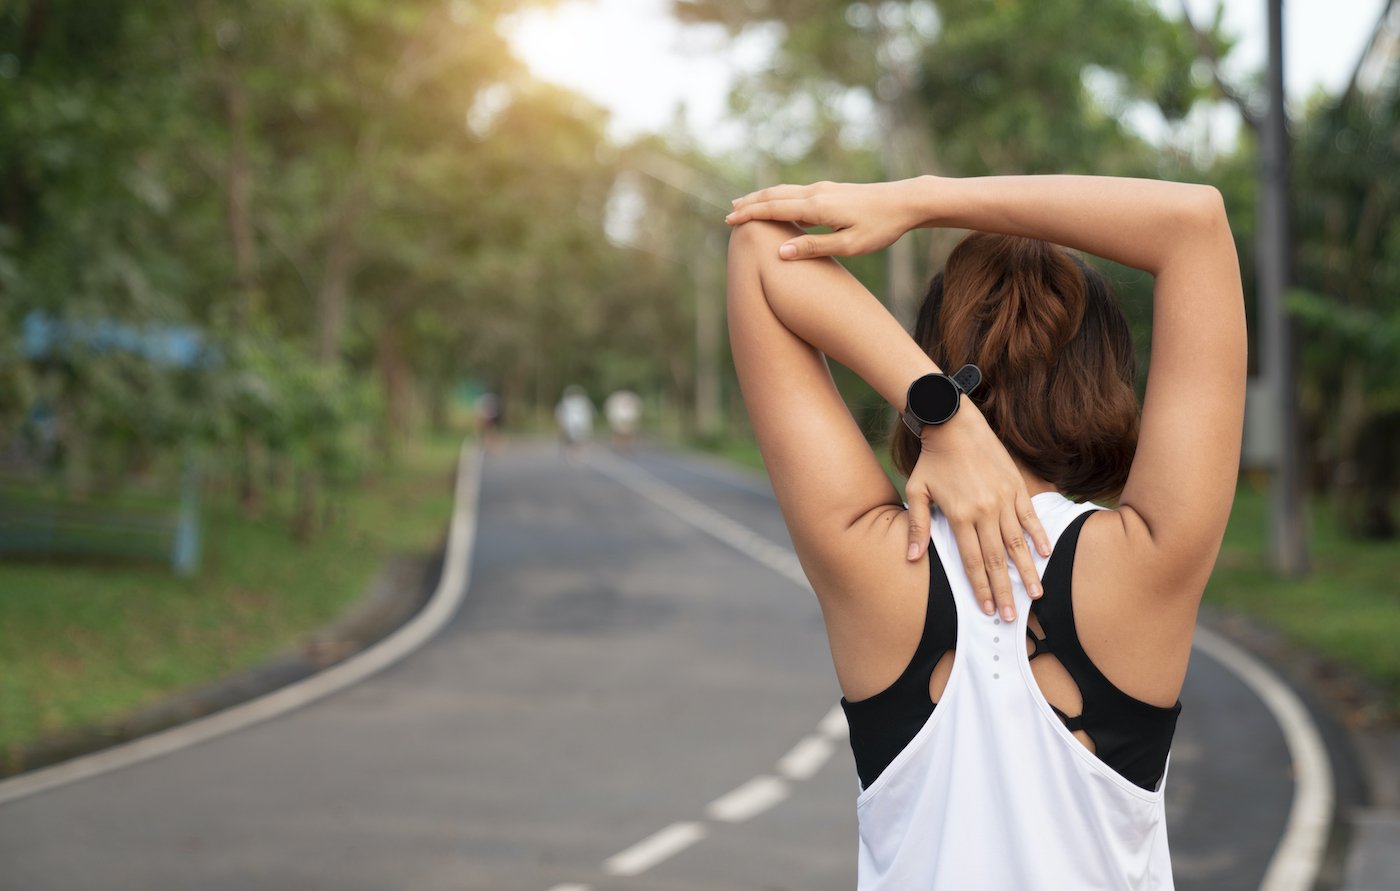 6 Shoulder Impingement Exercises You Can Do To Get Rid of the (Literal) Pain in Your Neck